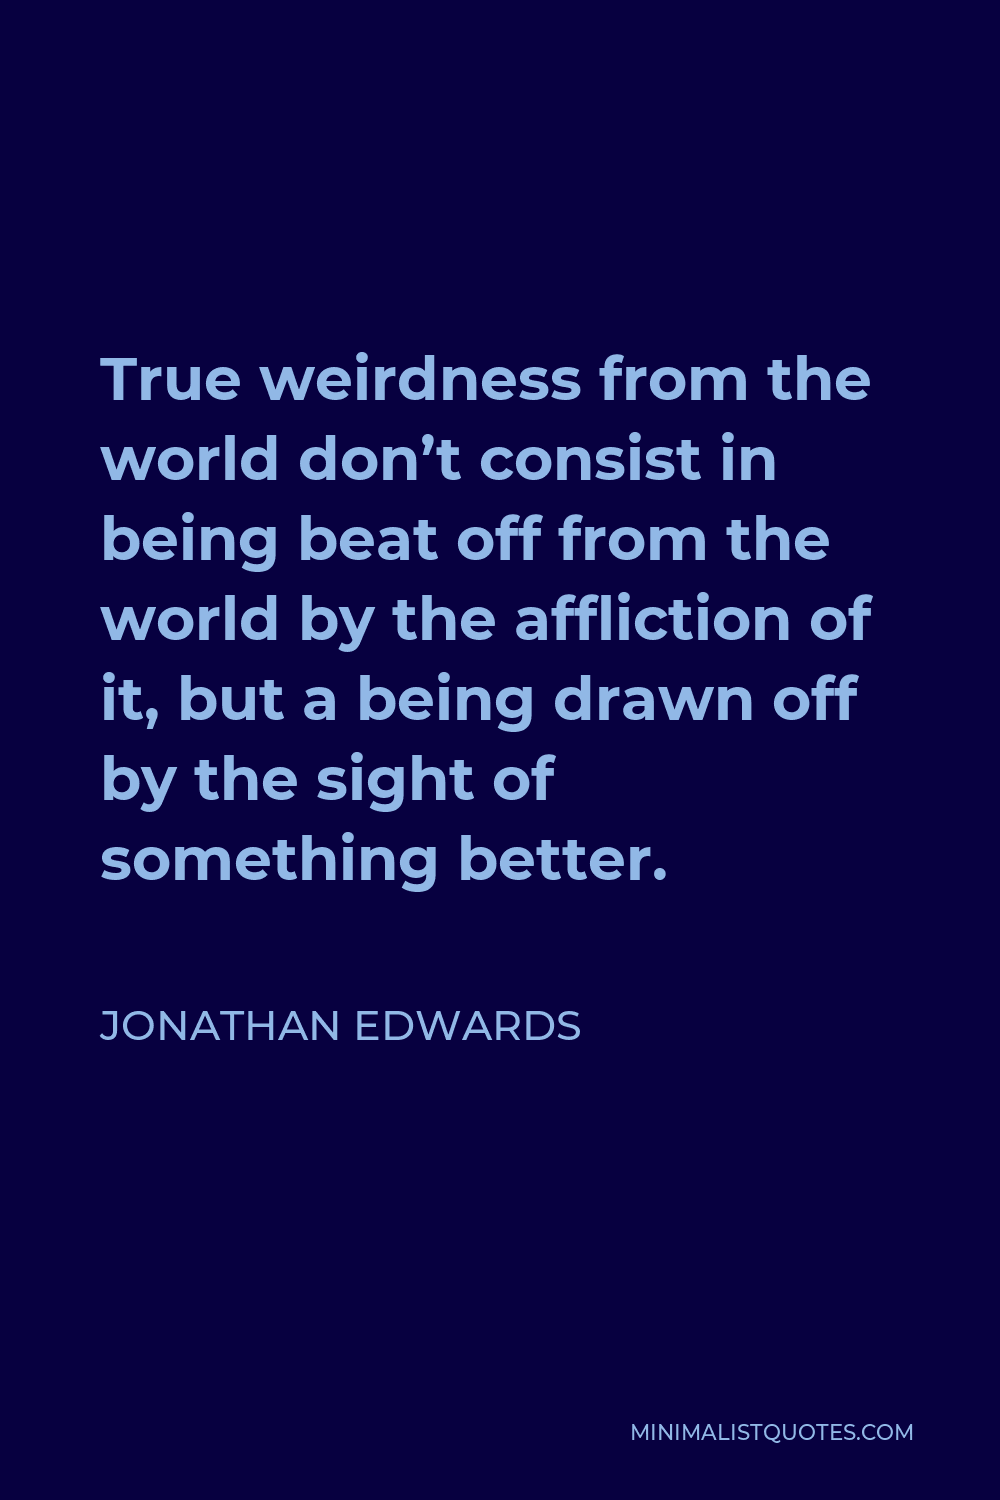 Jonathan Edwards Quote - True weirdness from the world don’t consist in being beat off from the world by the affliction of it, but a being drawn off by the sight of something better.